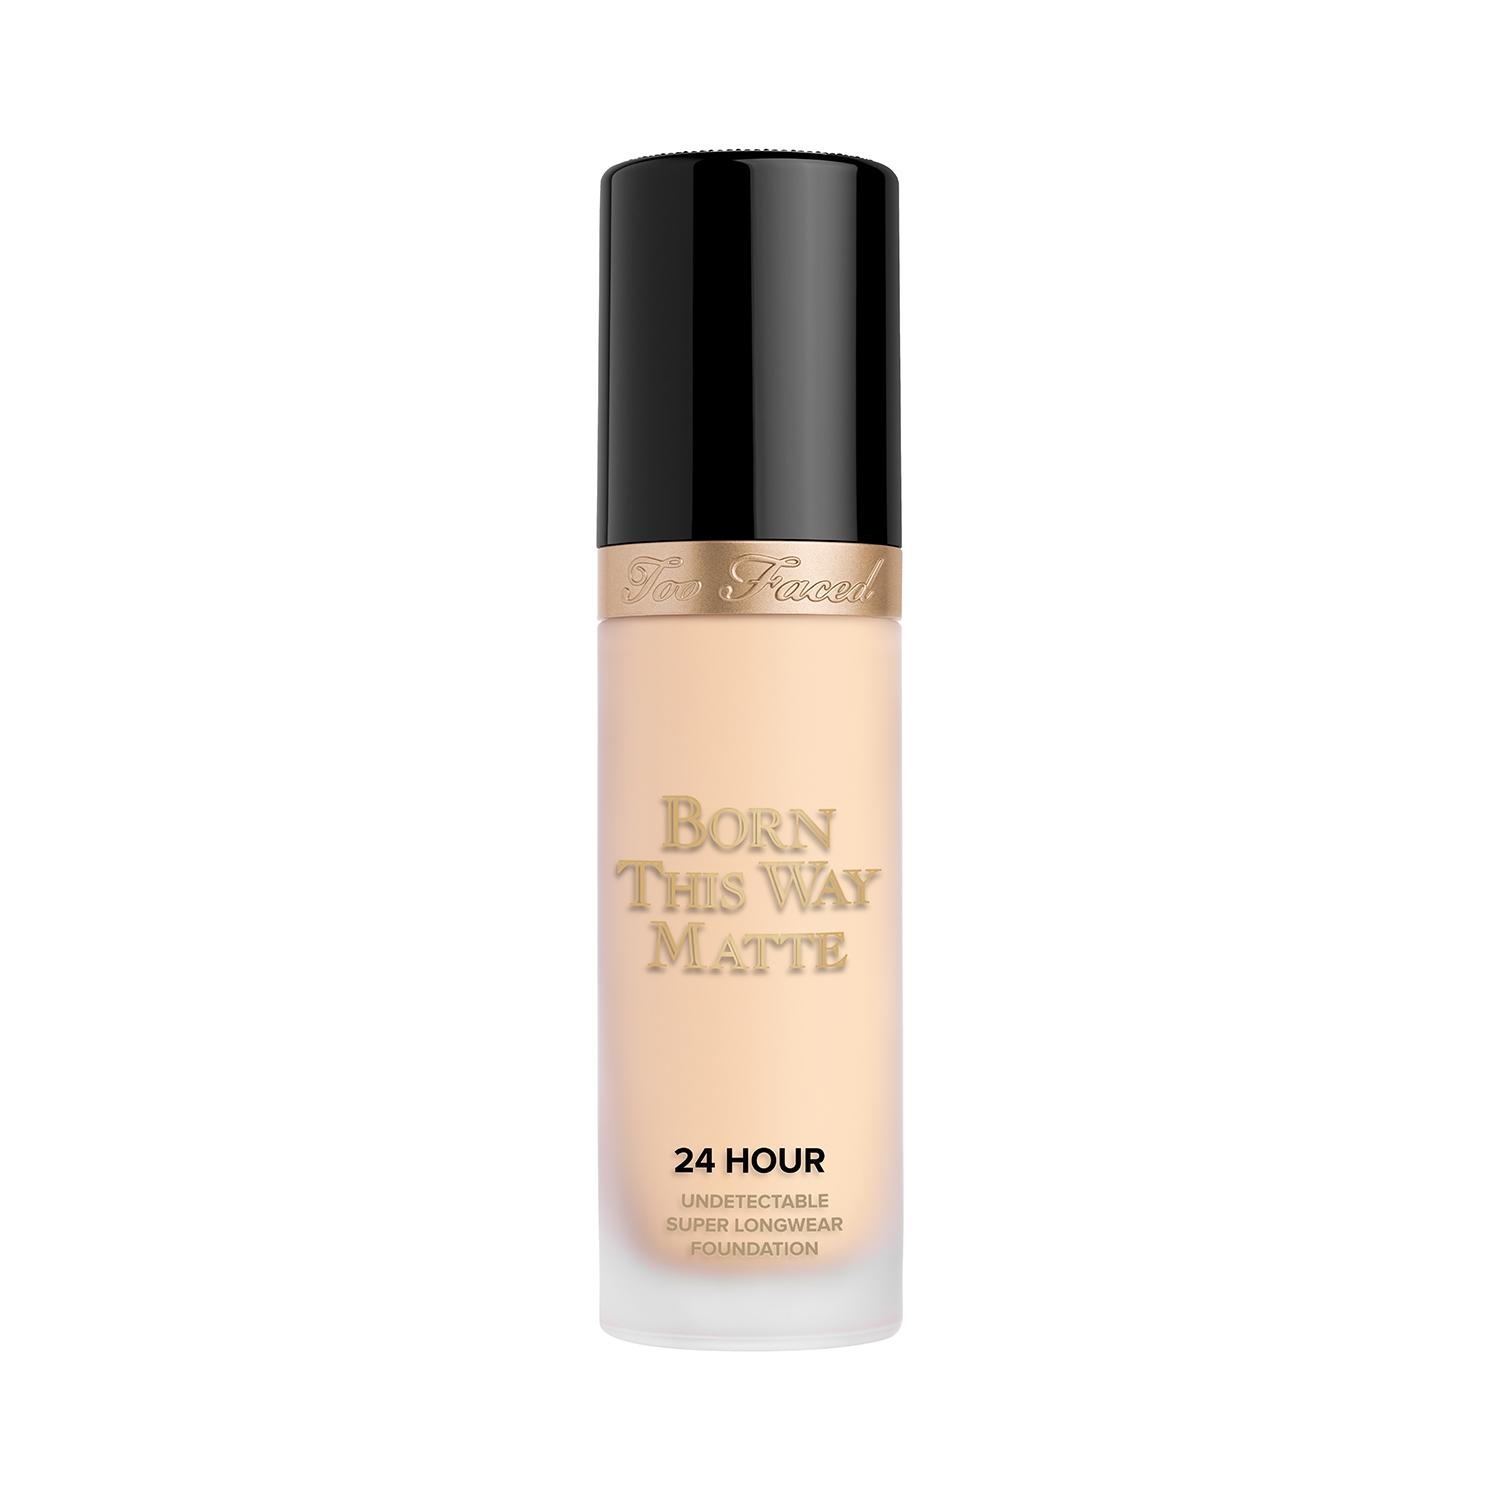 too faced born this way matte foundation - snow (30ml)